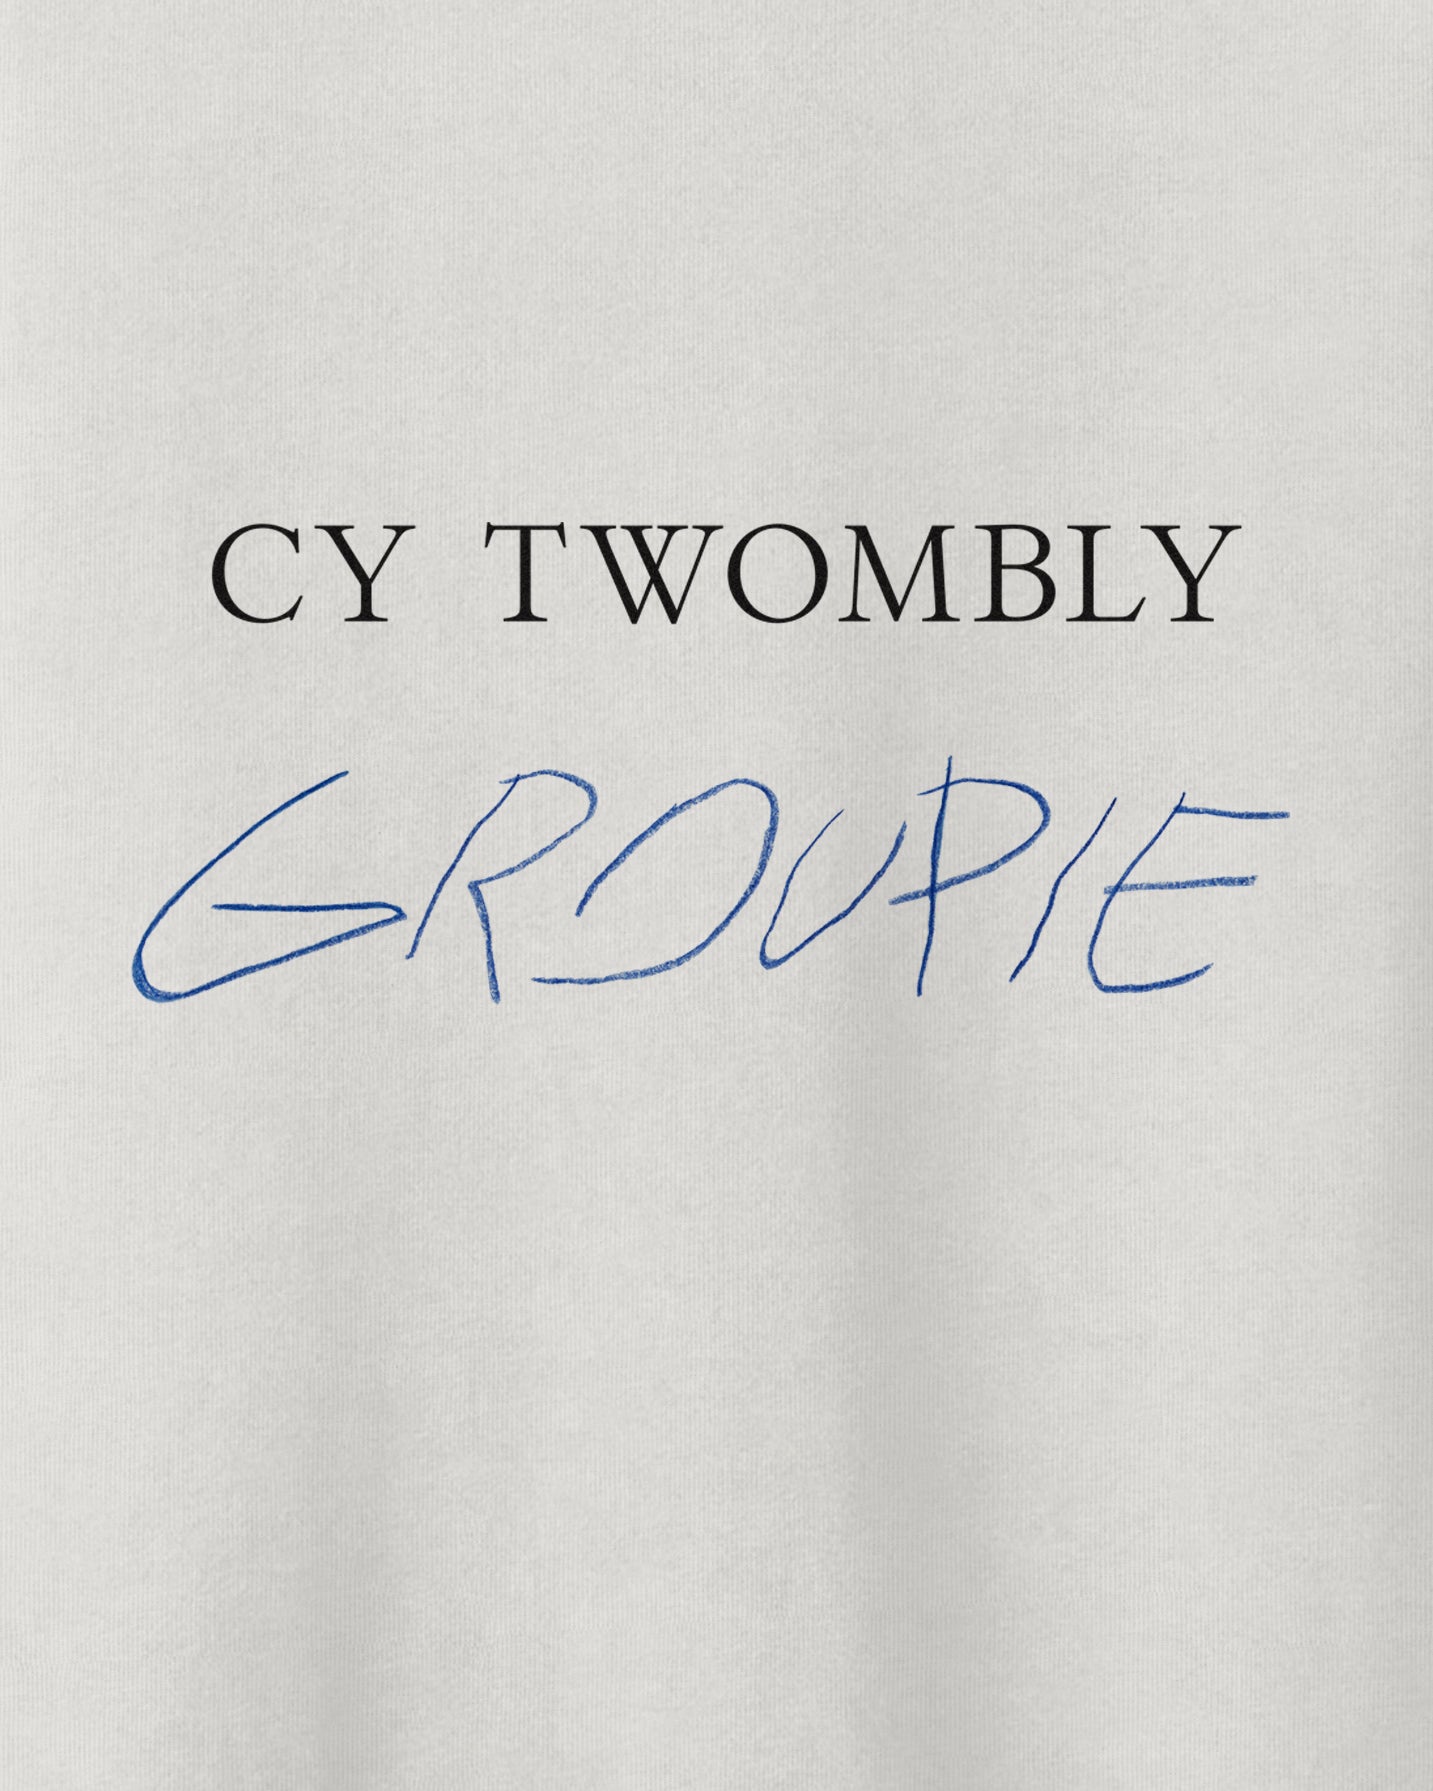 Cy Twombly Groupie Heavyweight Crewneck